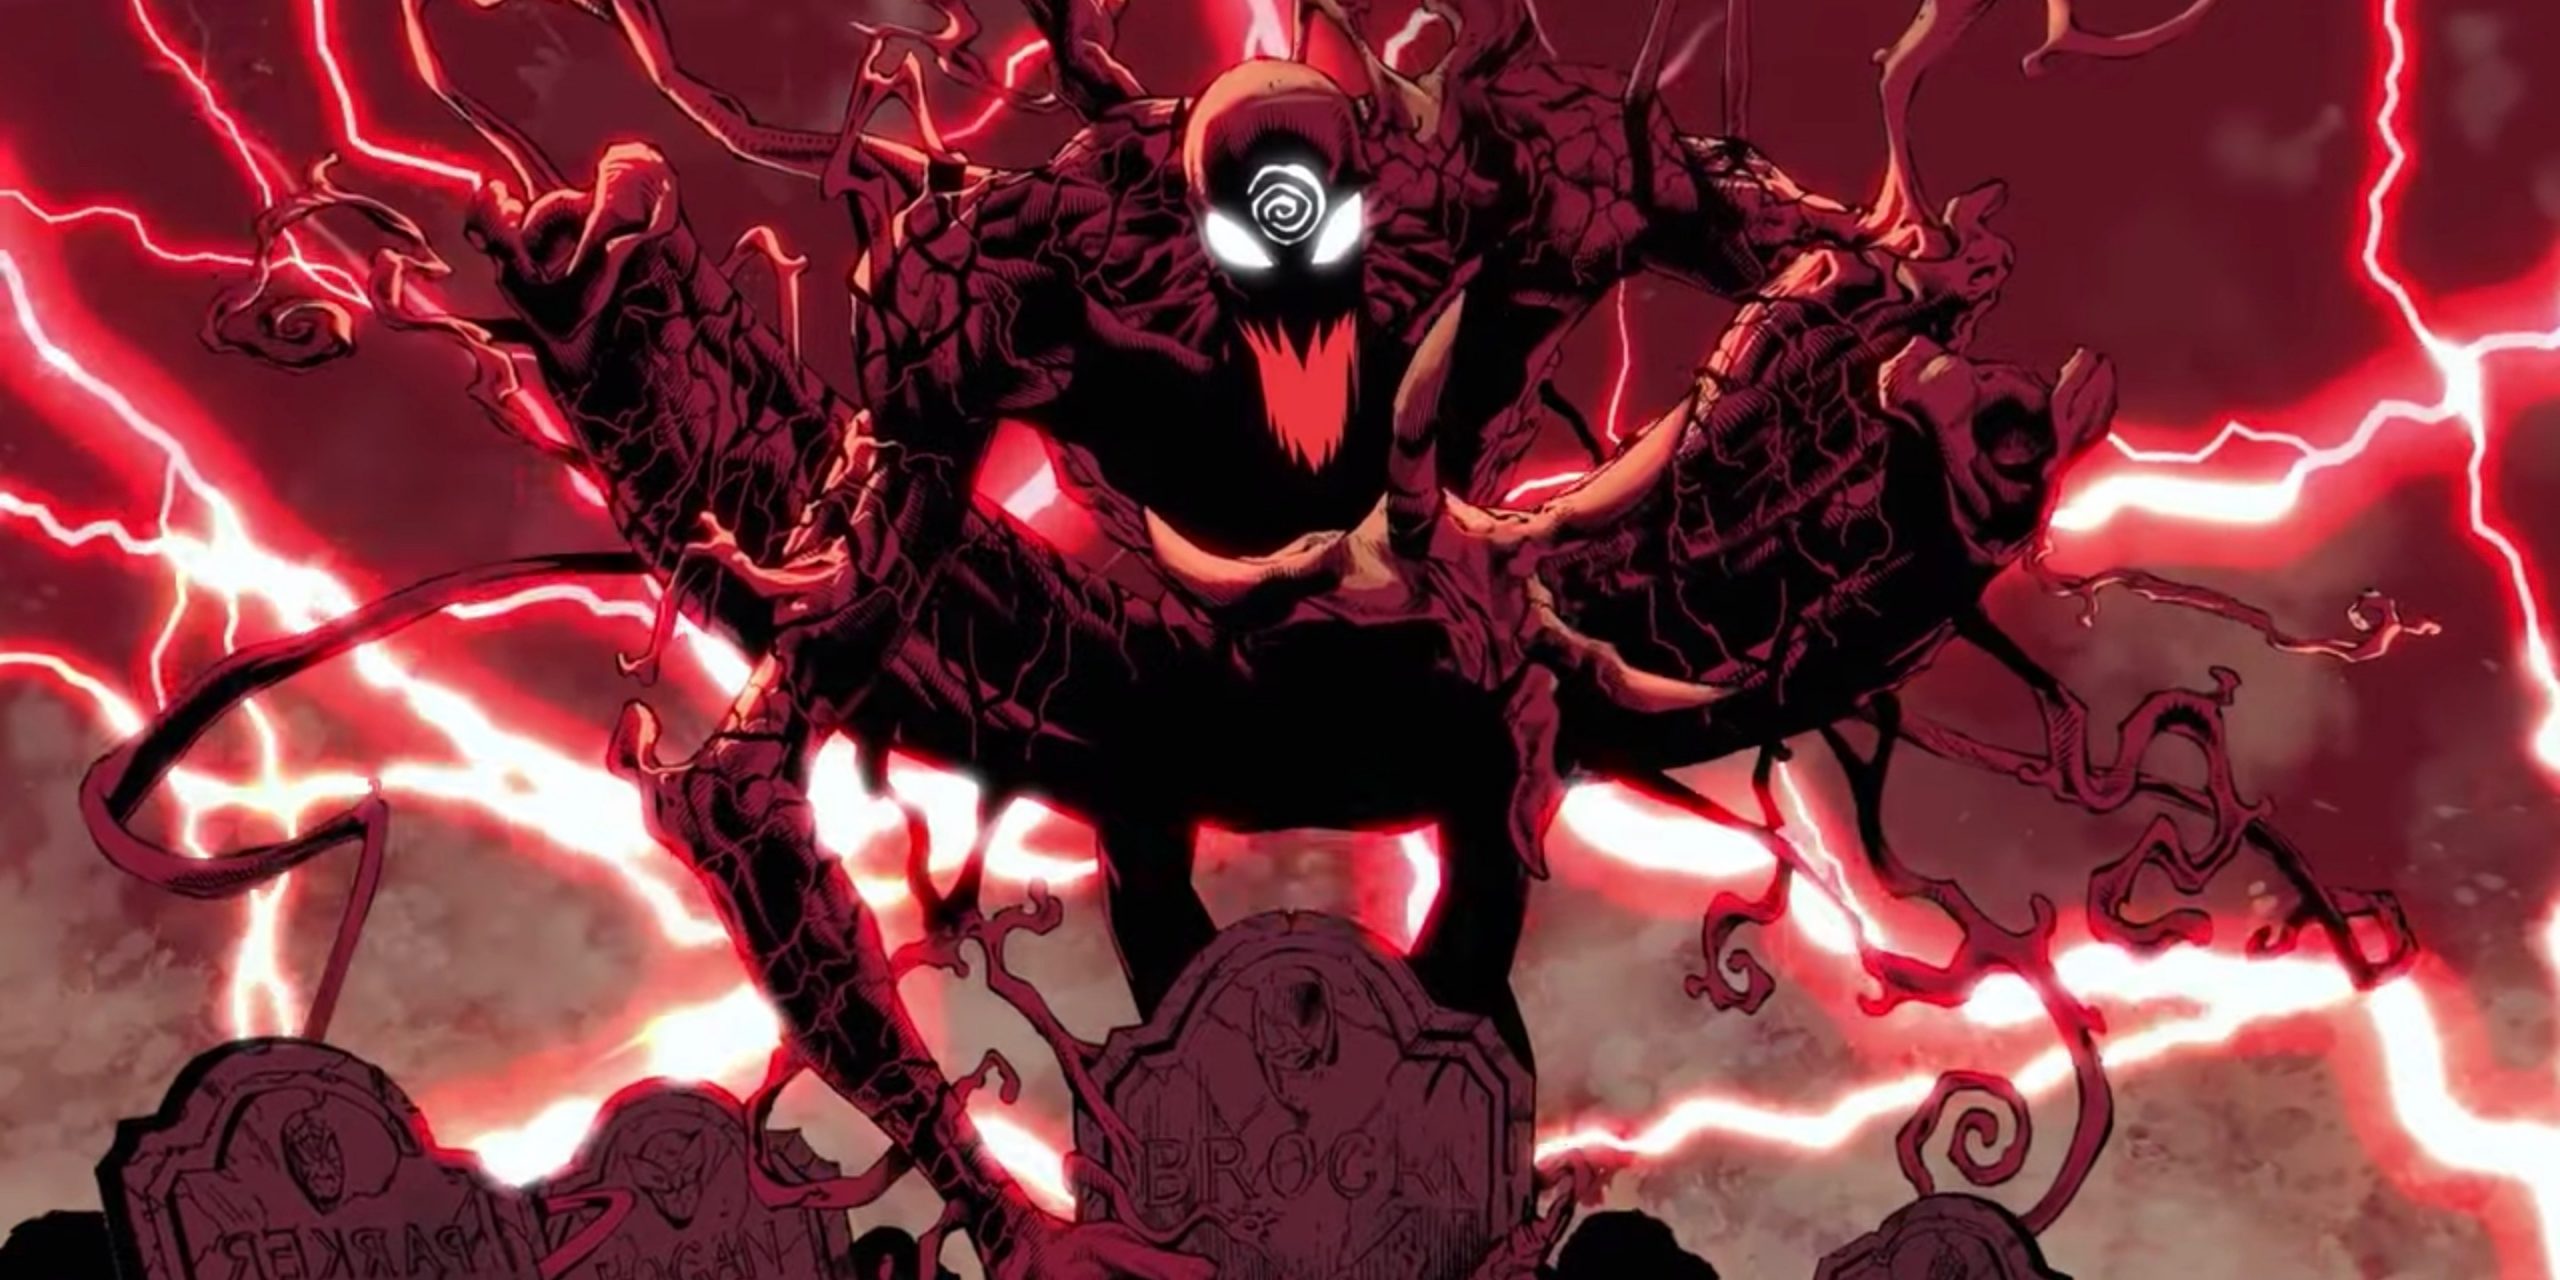 Marvel's Absolute Carnage from Spider-Man comic book